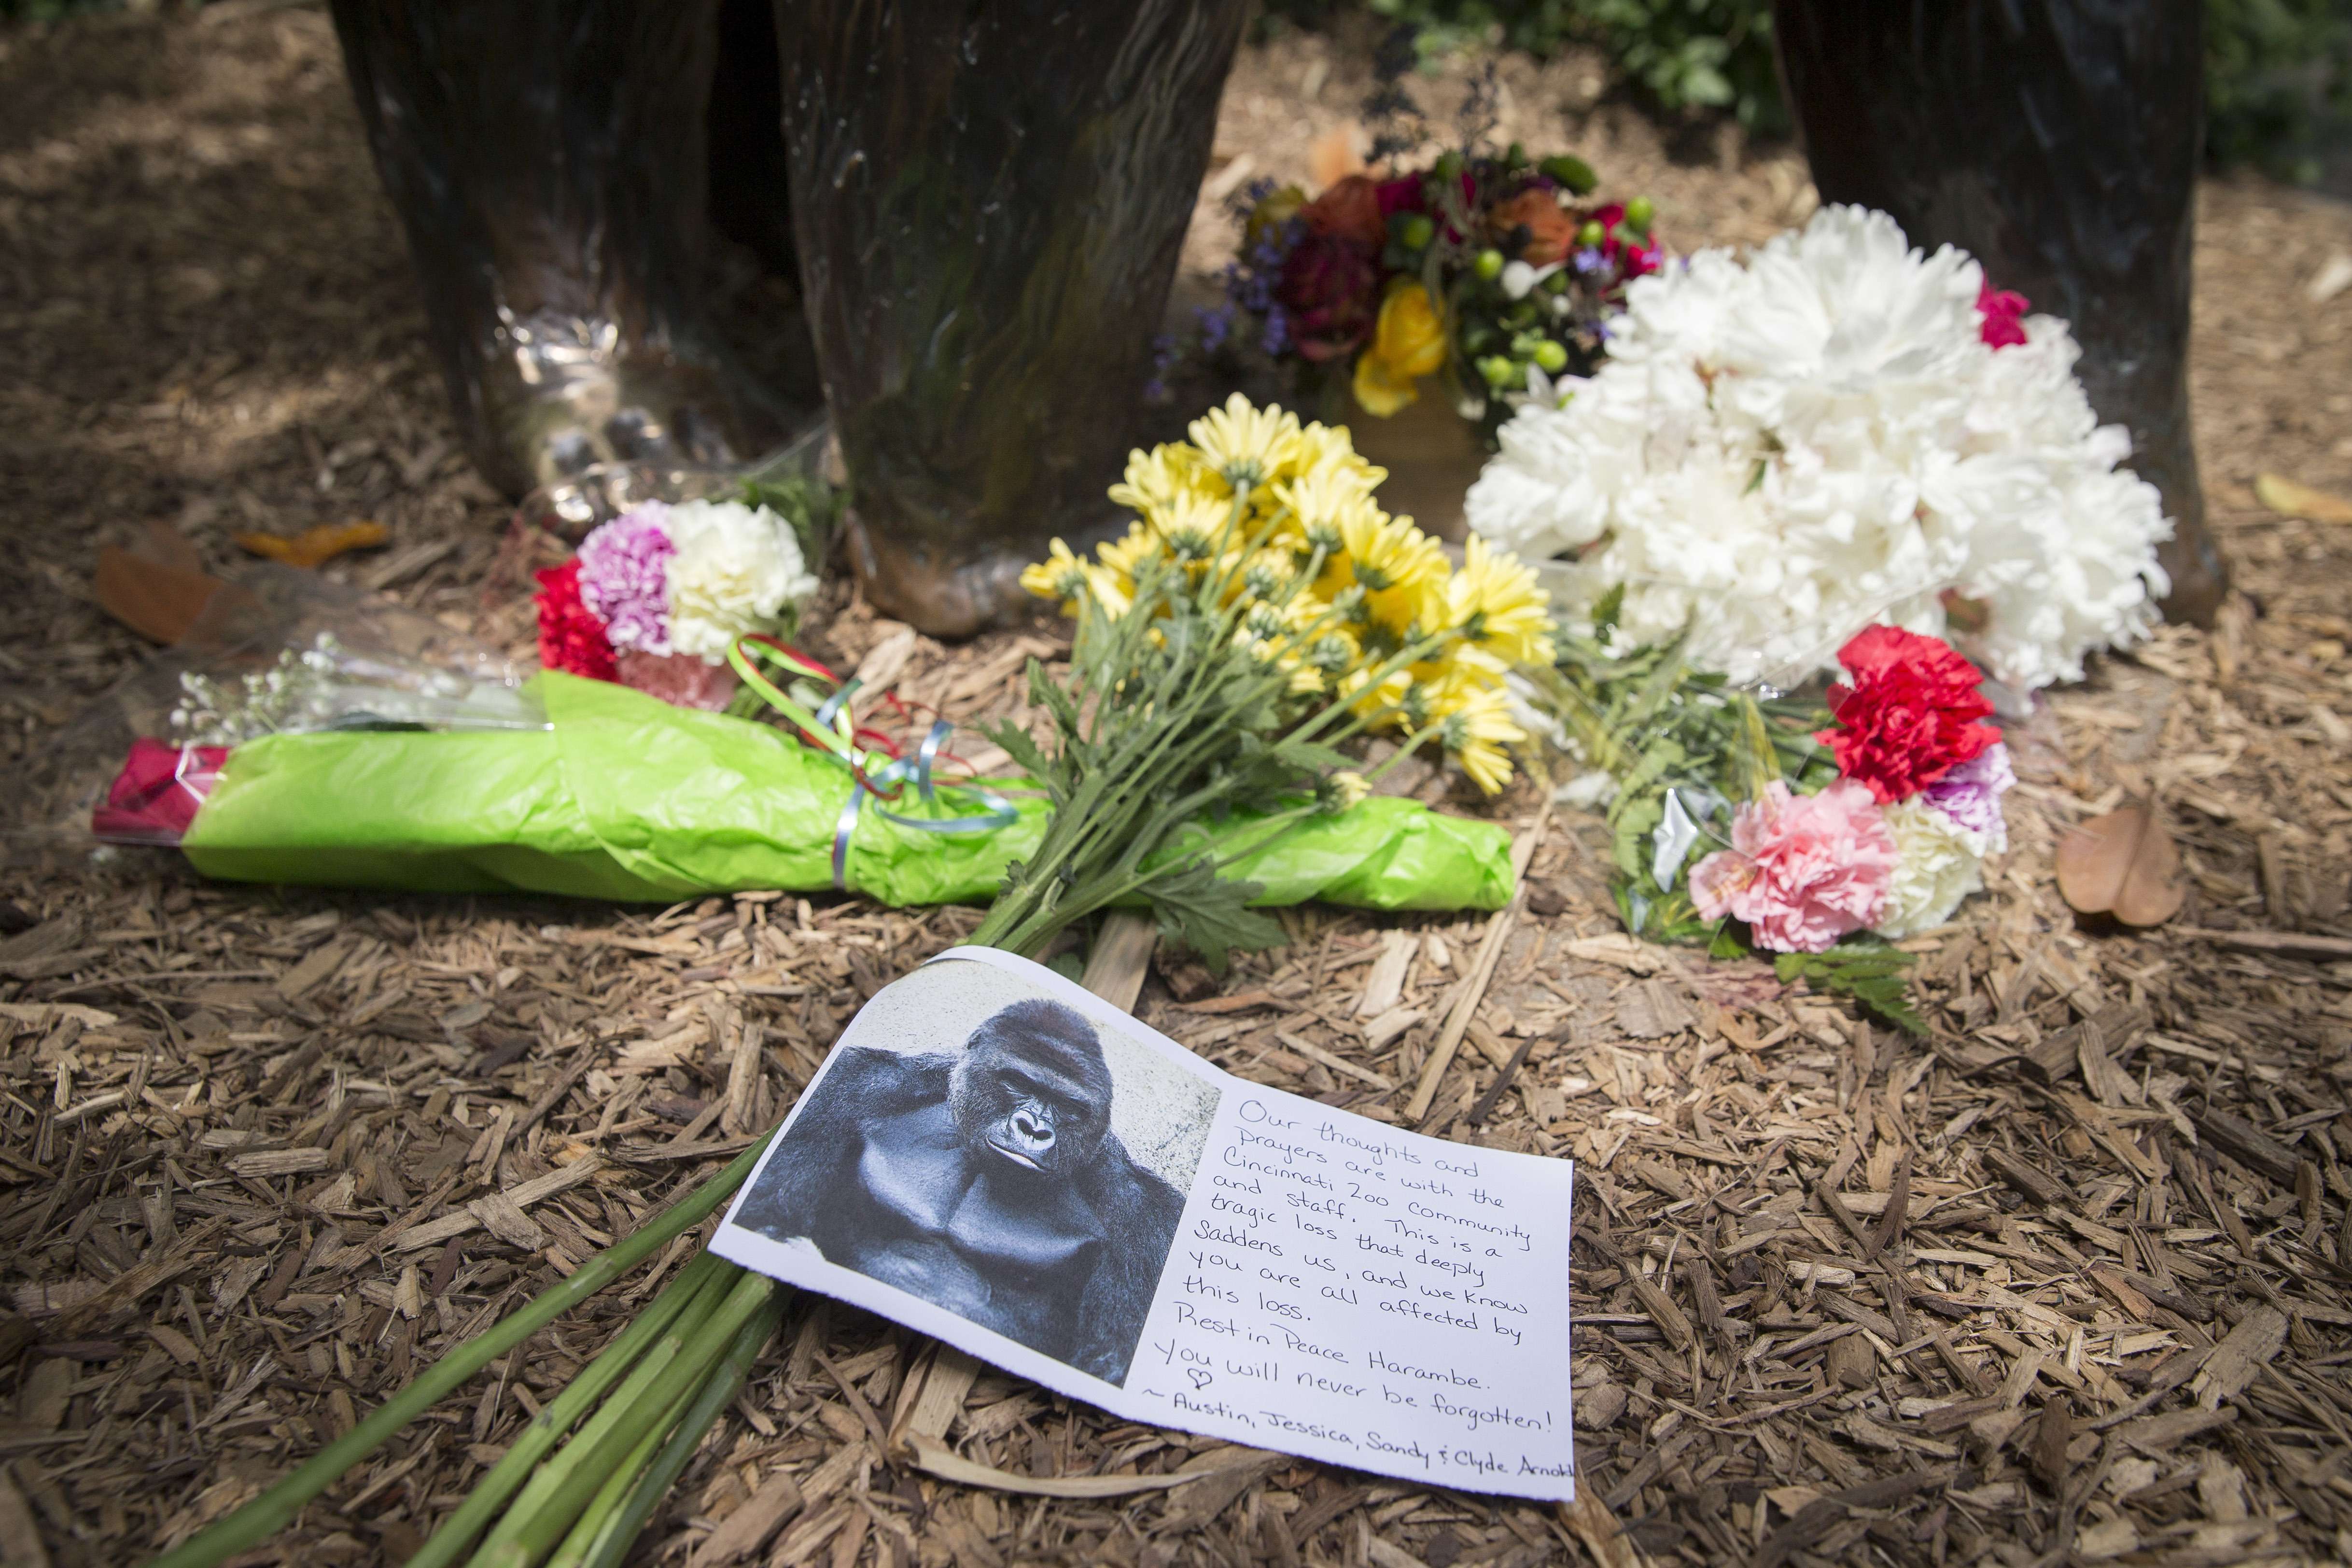 A sympathy card lies at the feet of a gorilla statue outside the Gorilla World exhibit at the Cincinnati zoo where a male gorilla named Harambe was killed, for fear he would hurt a young boy who had fallen into his enclosure. Photo: AP